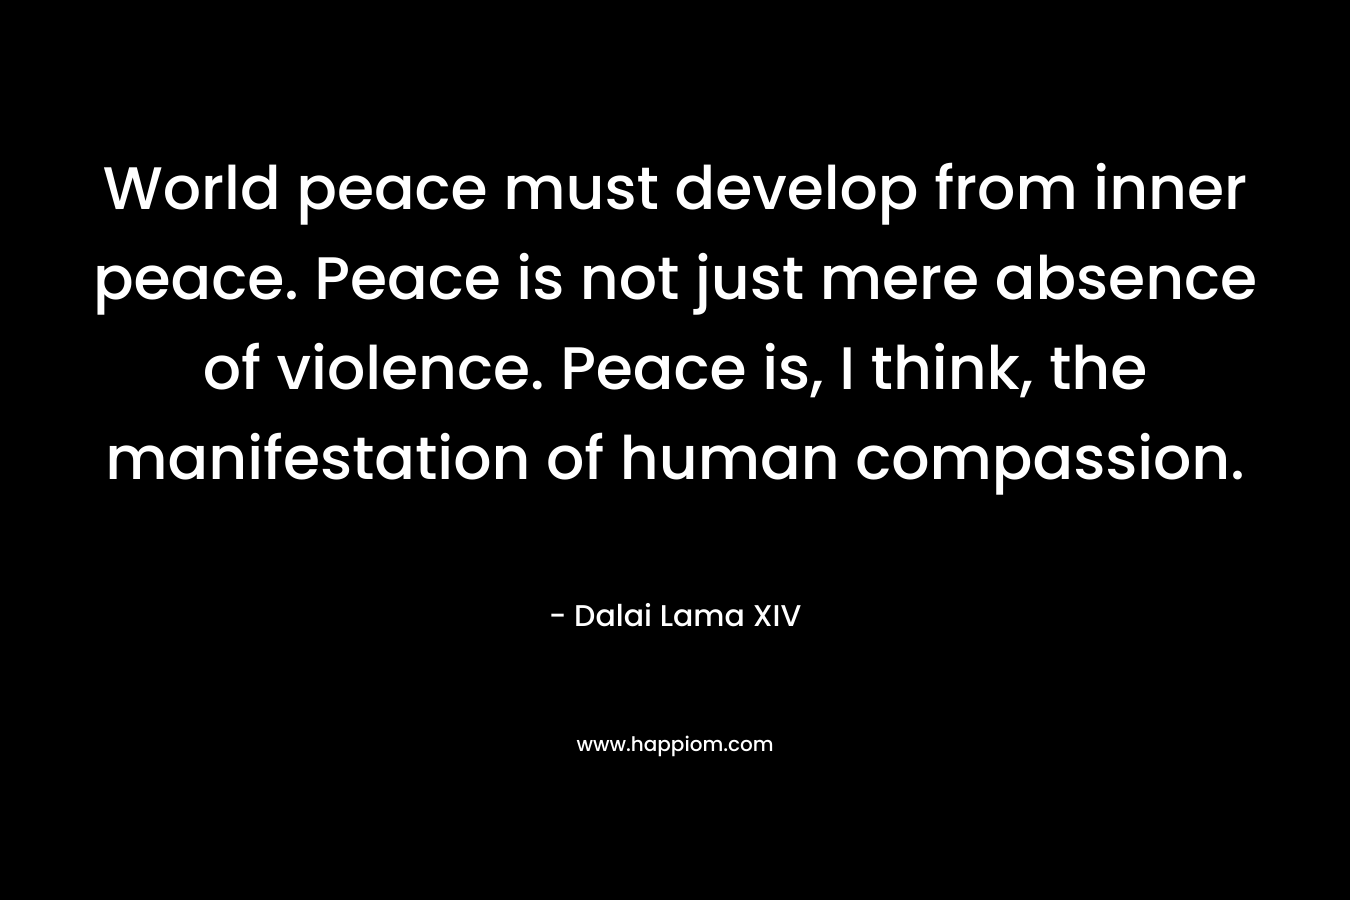 World peace must develop from inner peace. Peace is not just mere absence of violence. Peace is, I think, the manifestation of human compassion.